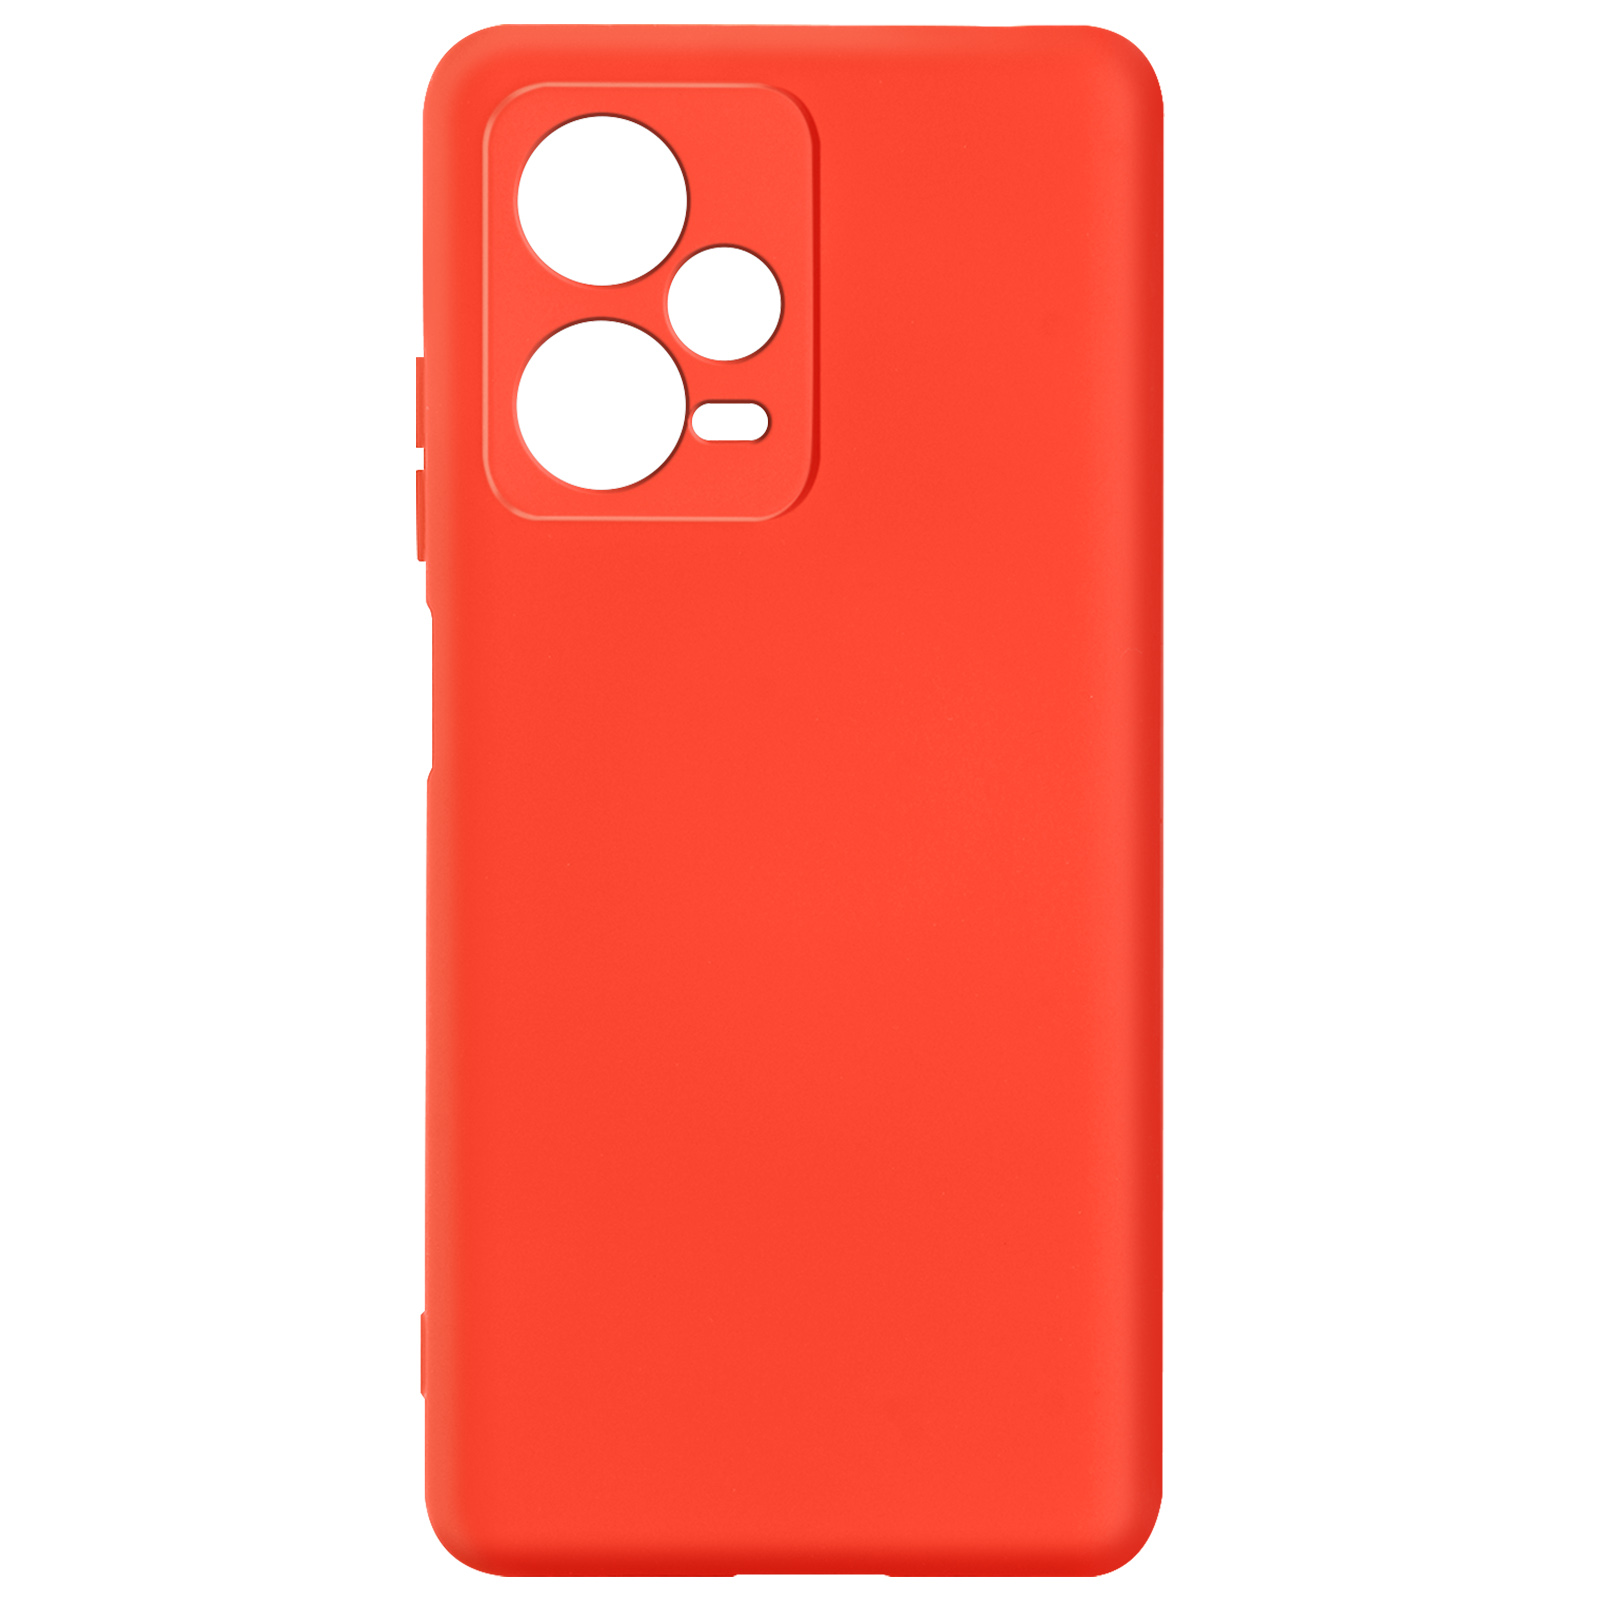 Rot Series, AVIZAR 12 5G, Backcover, Pro Redmi Touch Soft Note Xiaomi,